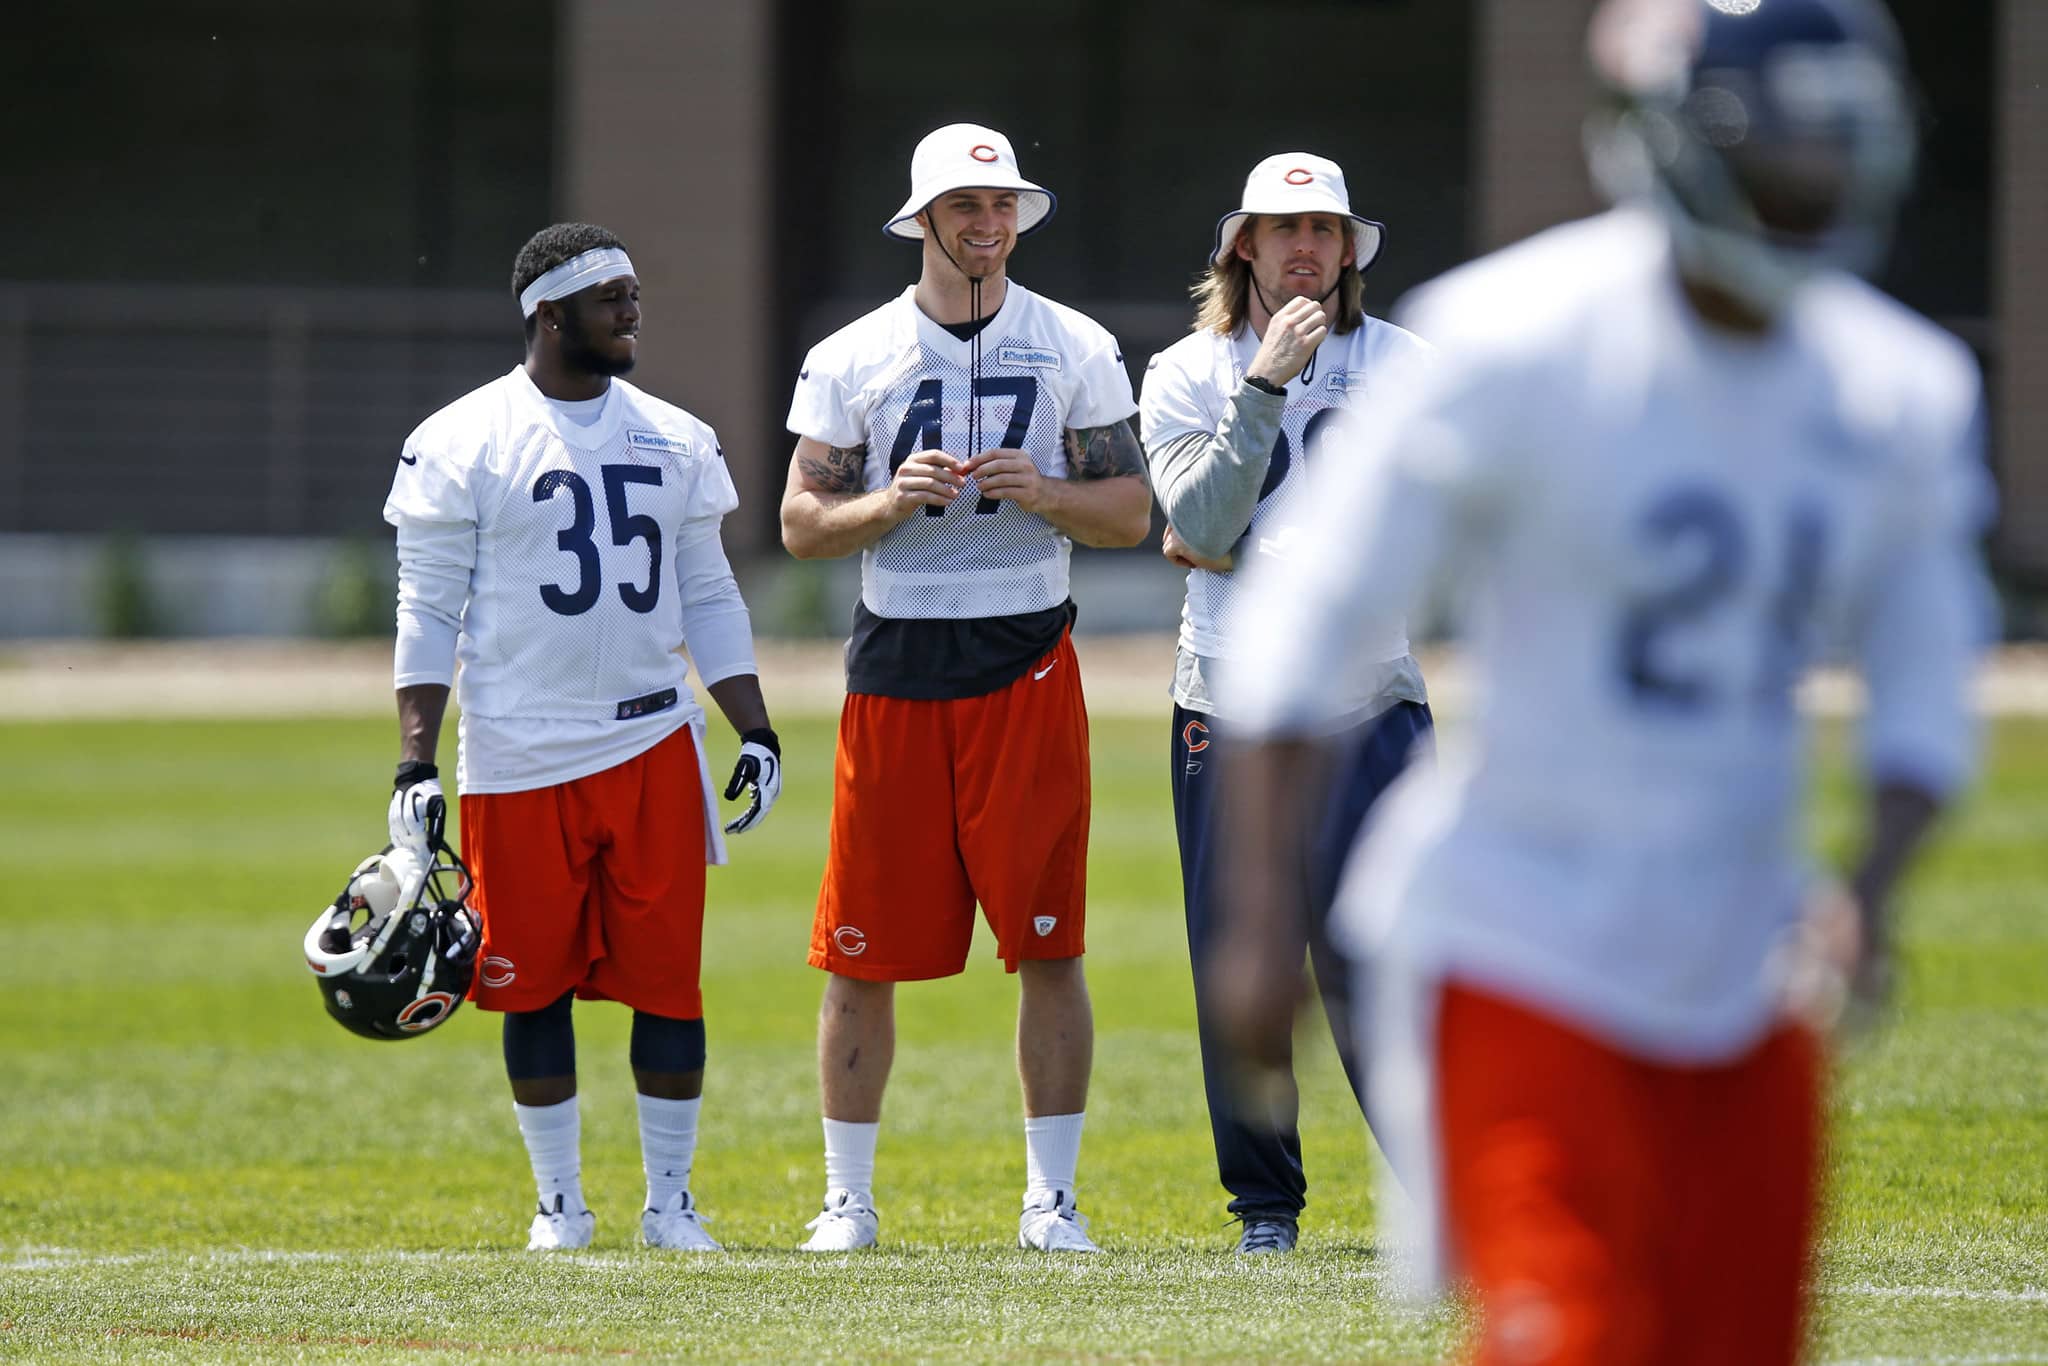 Bears safety Chris Conte (47) has an uphill climb ahead of him to make the 53-man roster (photo taken by the Chicago Tribune).